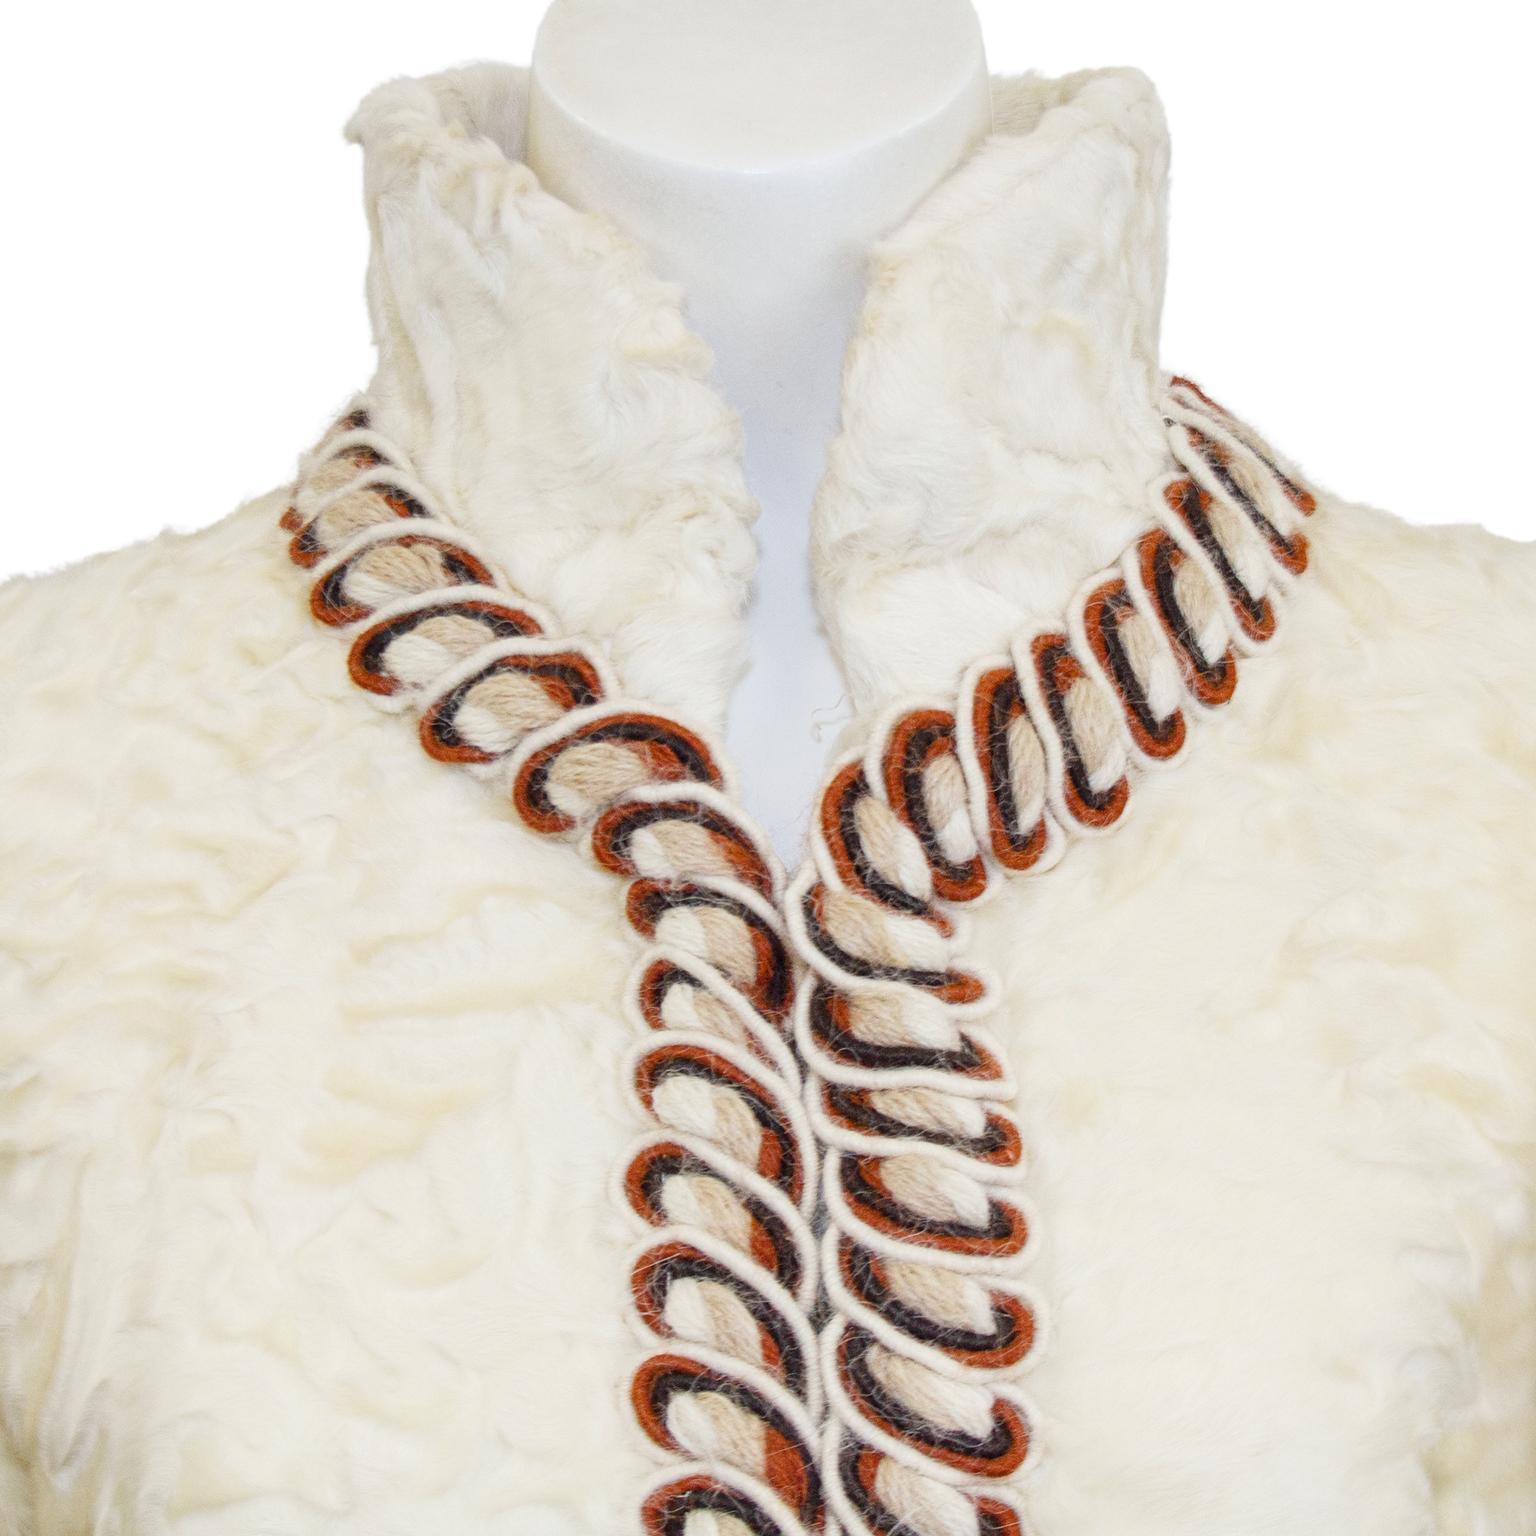 Women's 1980s Chanel Haute Couture Cream Broadtail Jacket 